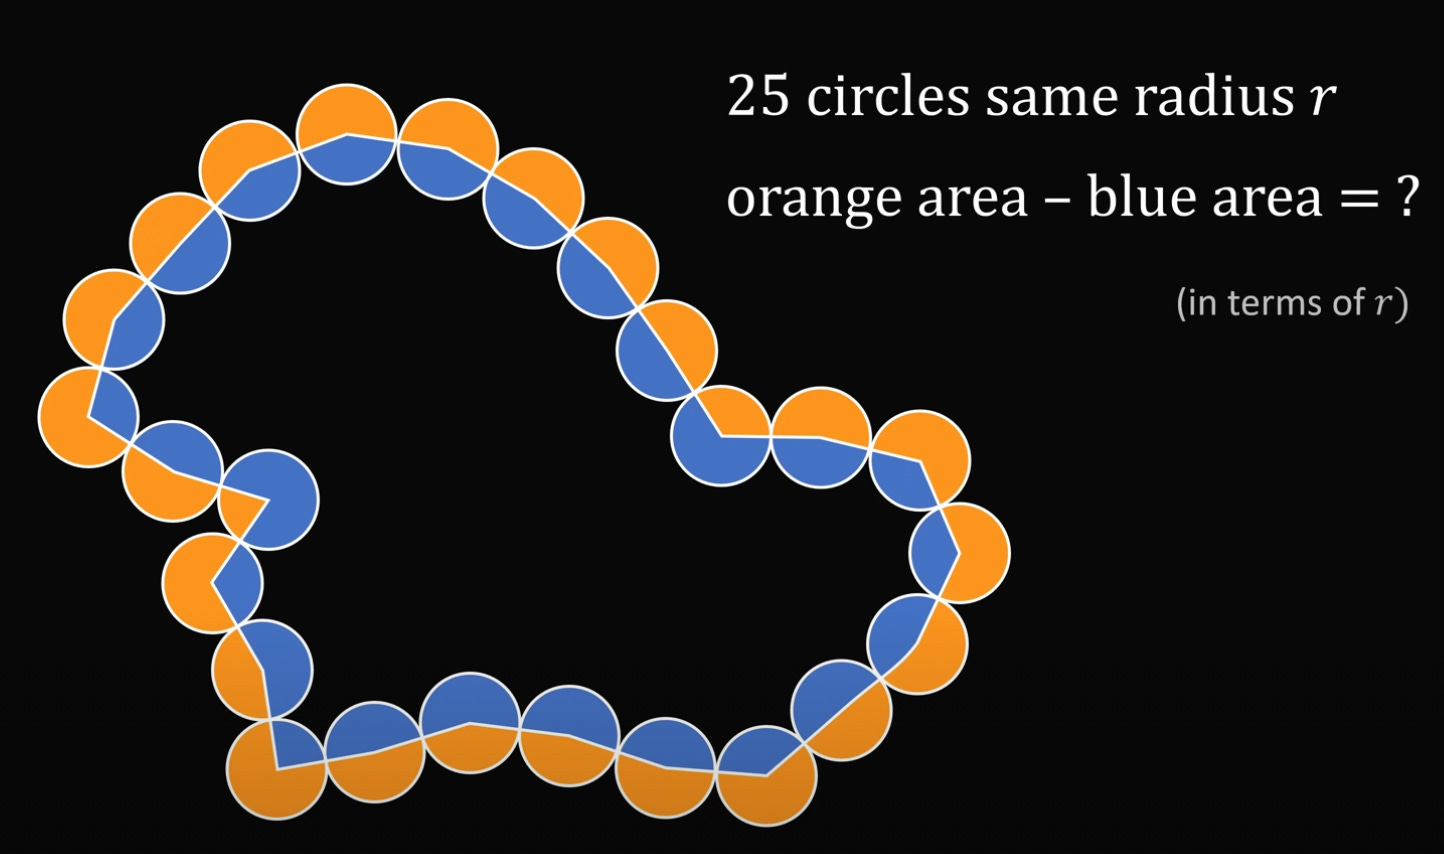 25 circular beads are shown, tangent to each other. At the top, it says "25 circles same radius r". Inside the radii to the tangents, the sectors are shaded blue; outside these radii, the sectors are shaded orange. The top also says "orange area minus blue area = ? (in terms of r)."